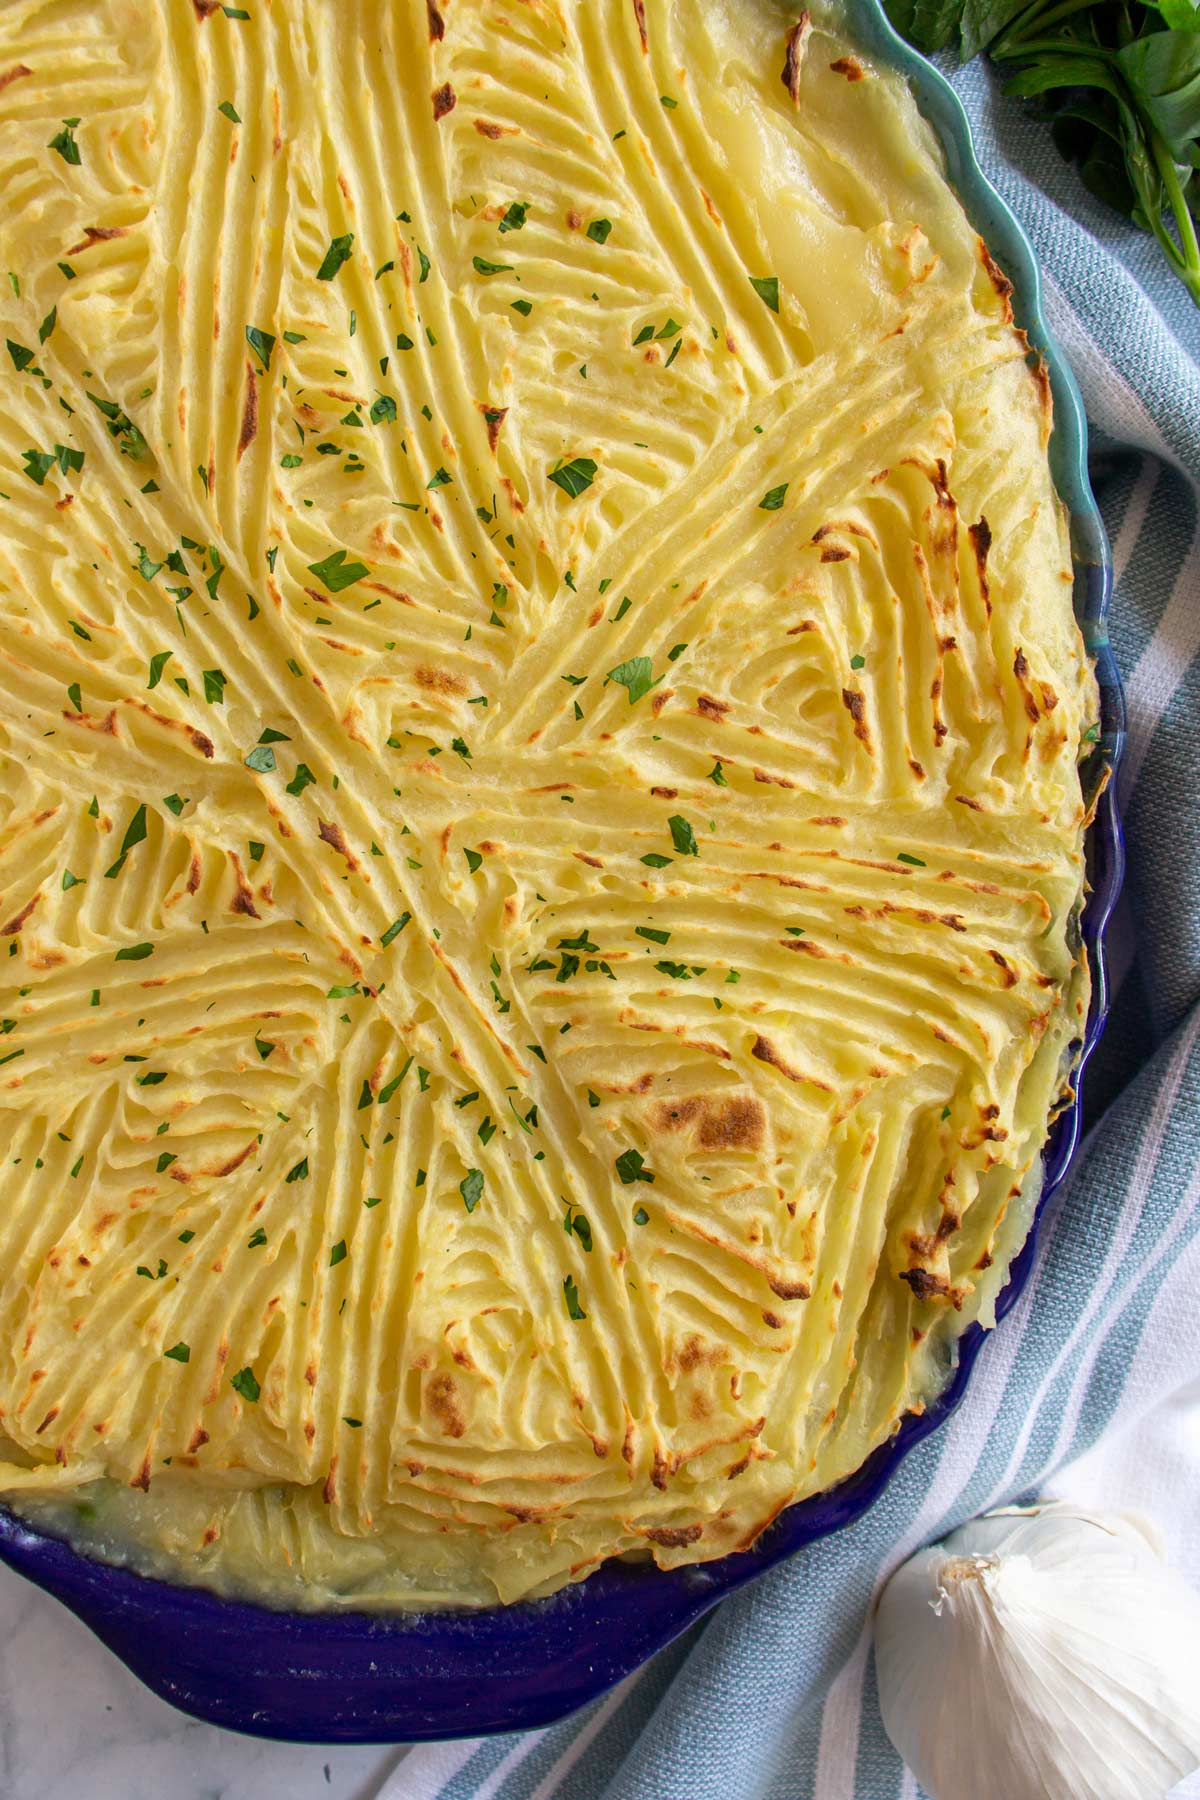 Closeup of a mashed potato crust with ridges on top of an oval baking dish.